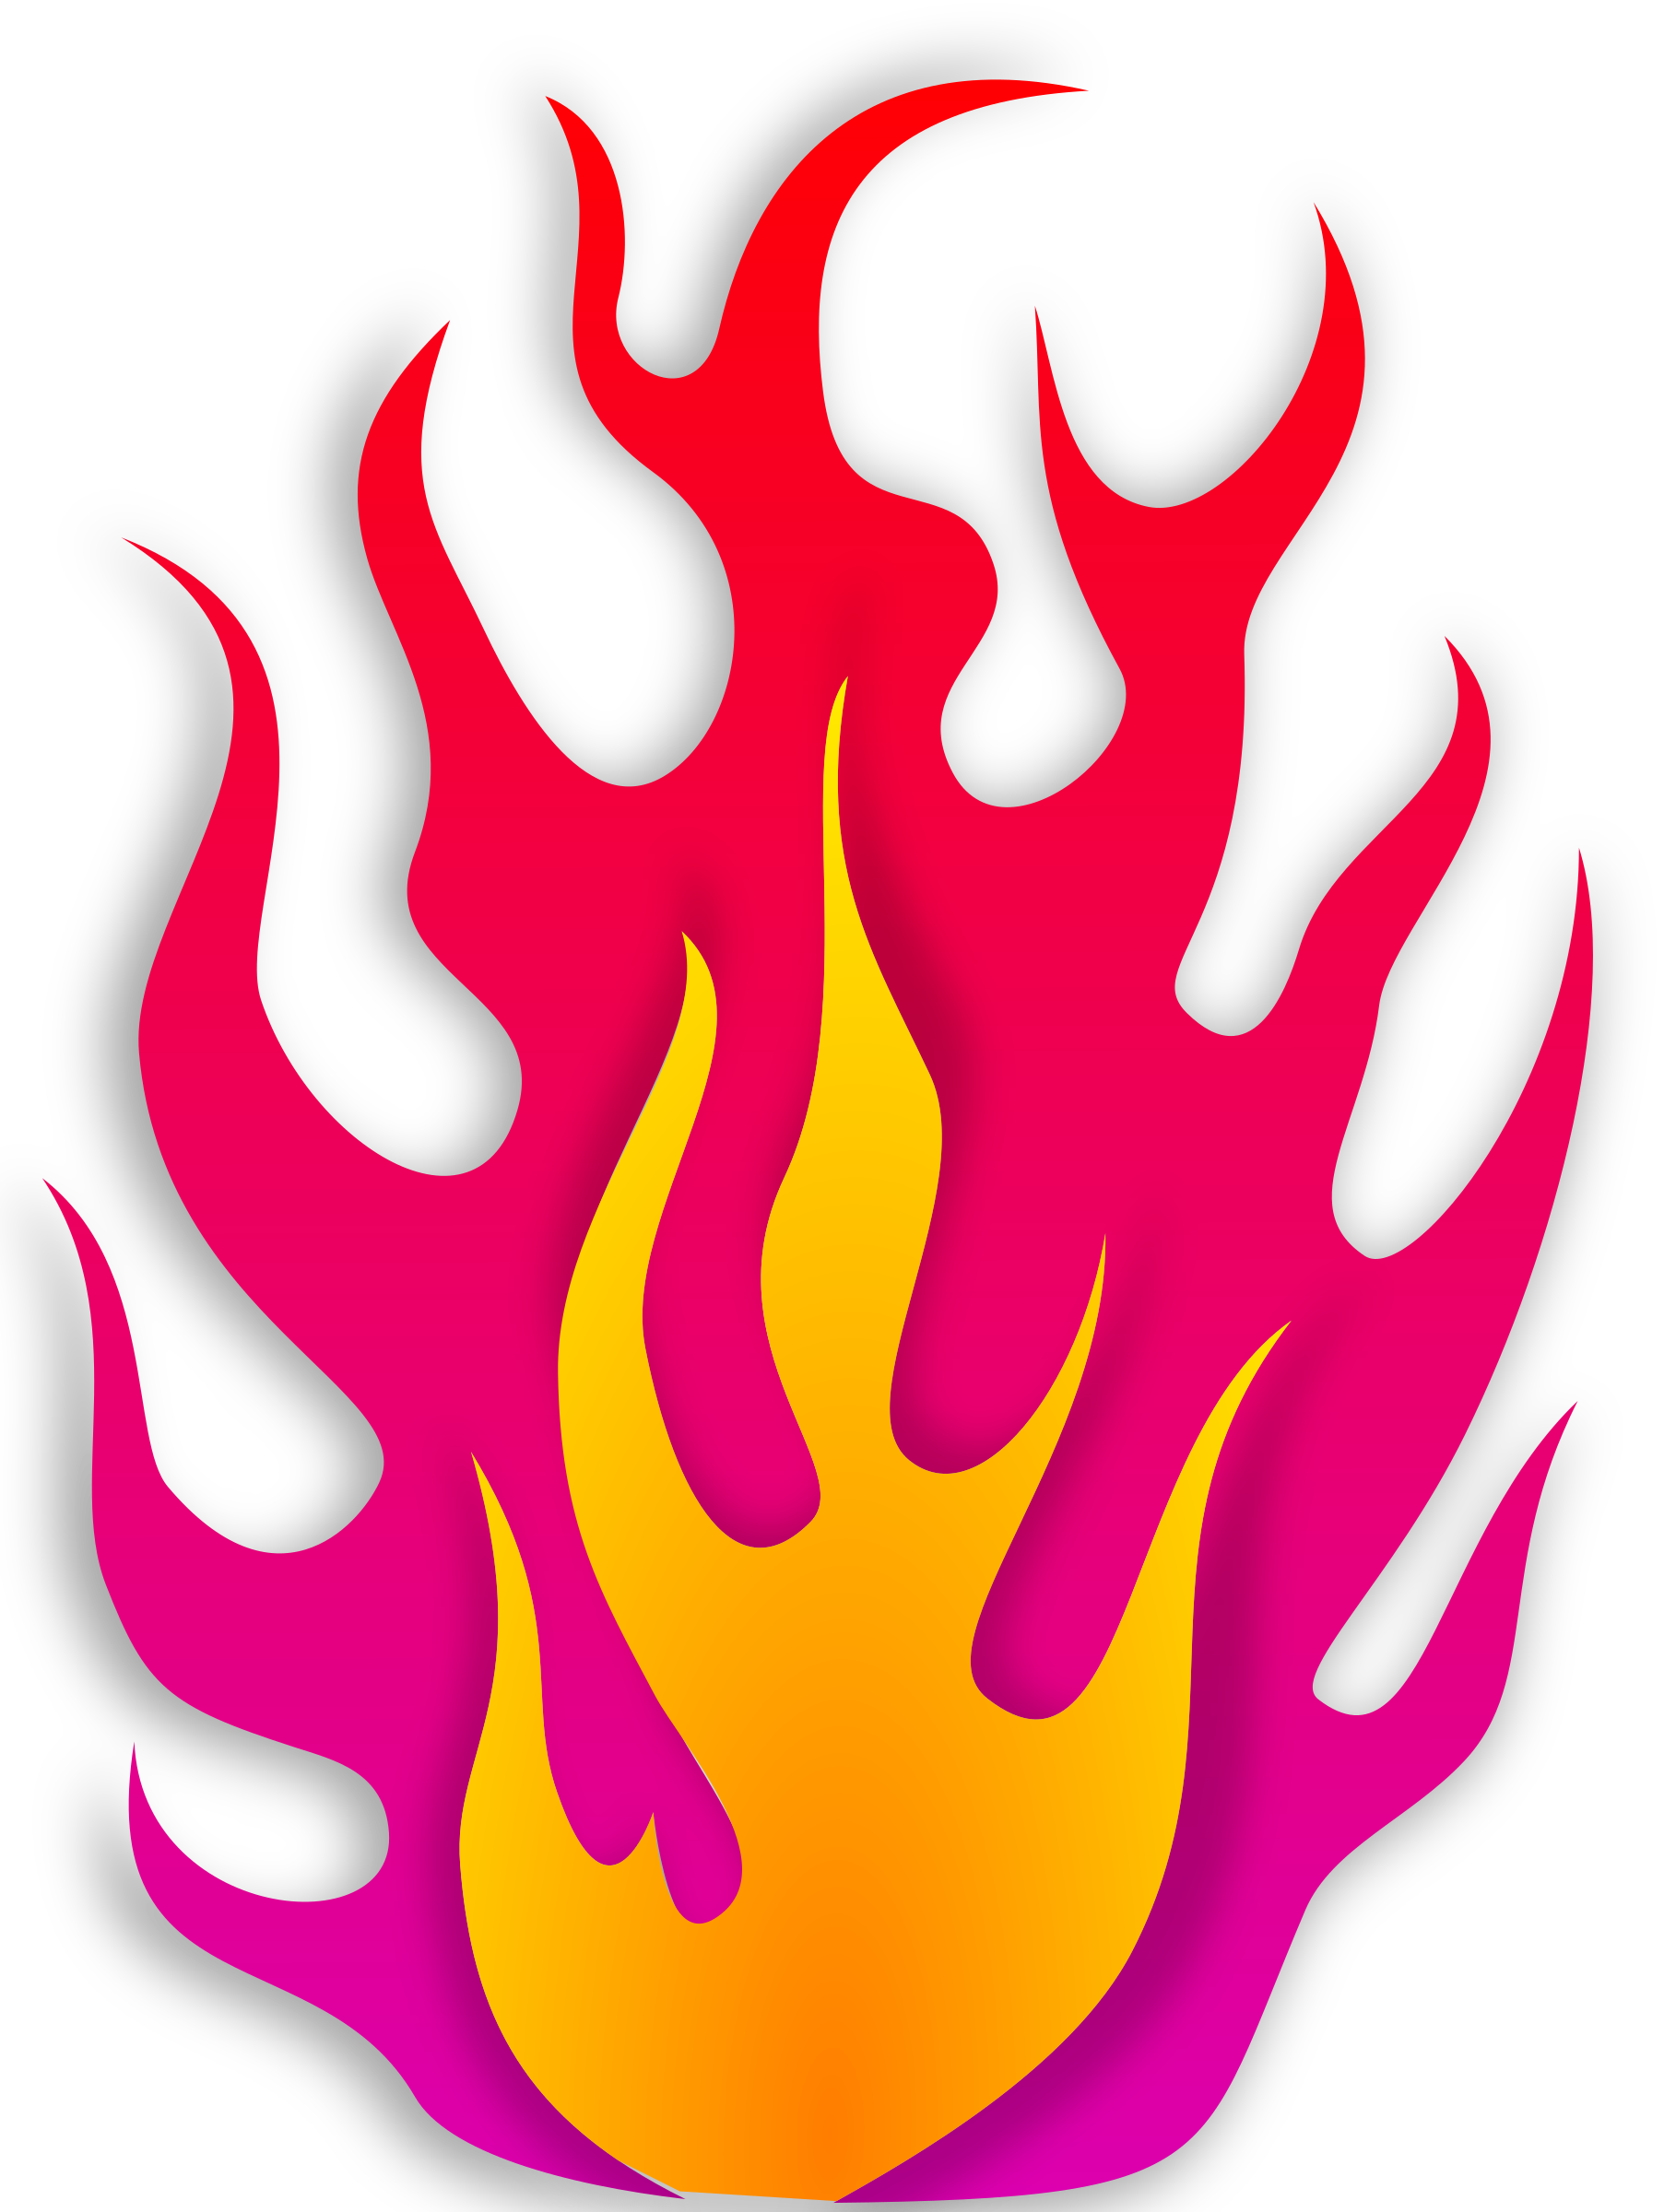 Big image png. Flame clipart royalty free